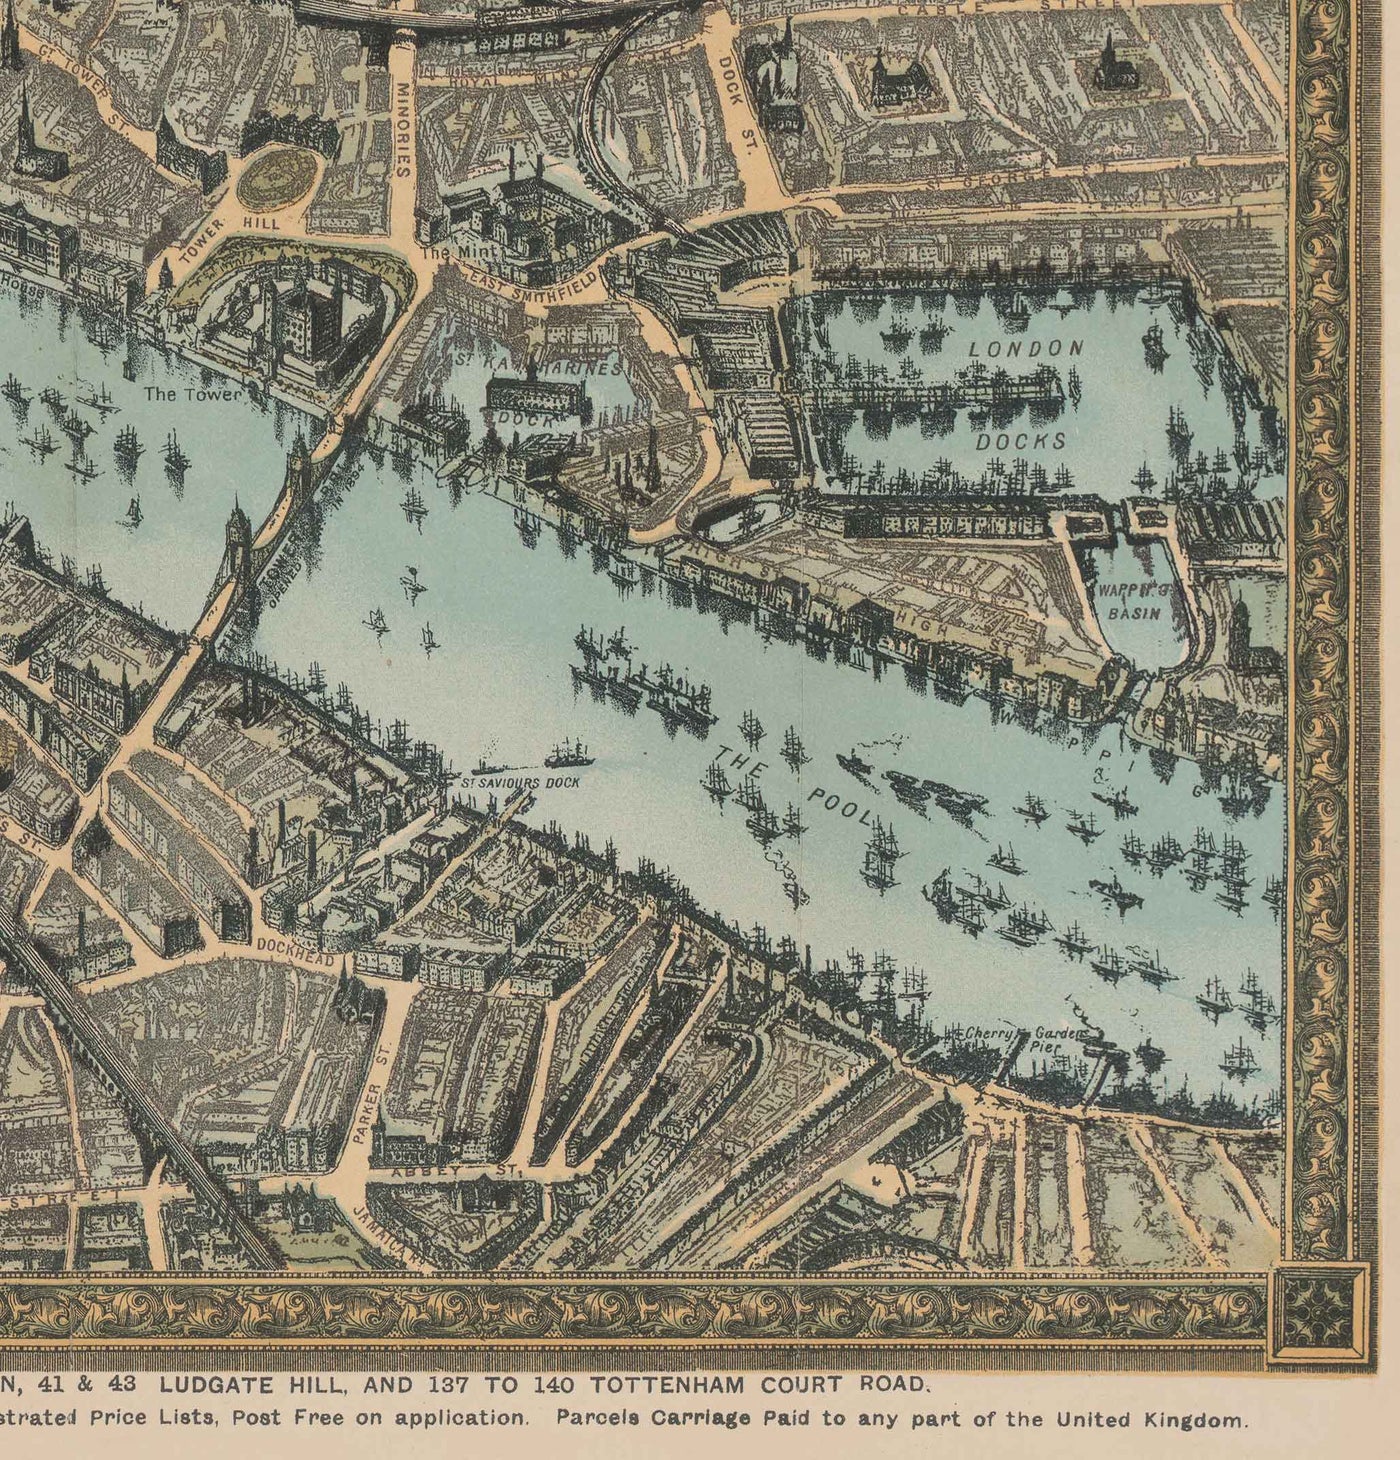 Old Birds Eye Map of London in 1892 by Charles Baker & Co - Westminster, City of London, Lambeth, Covent Garden, Marylebone